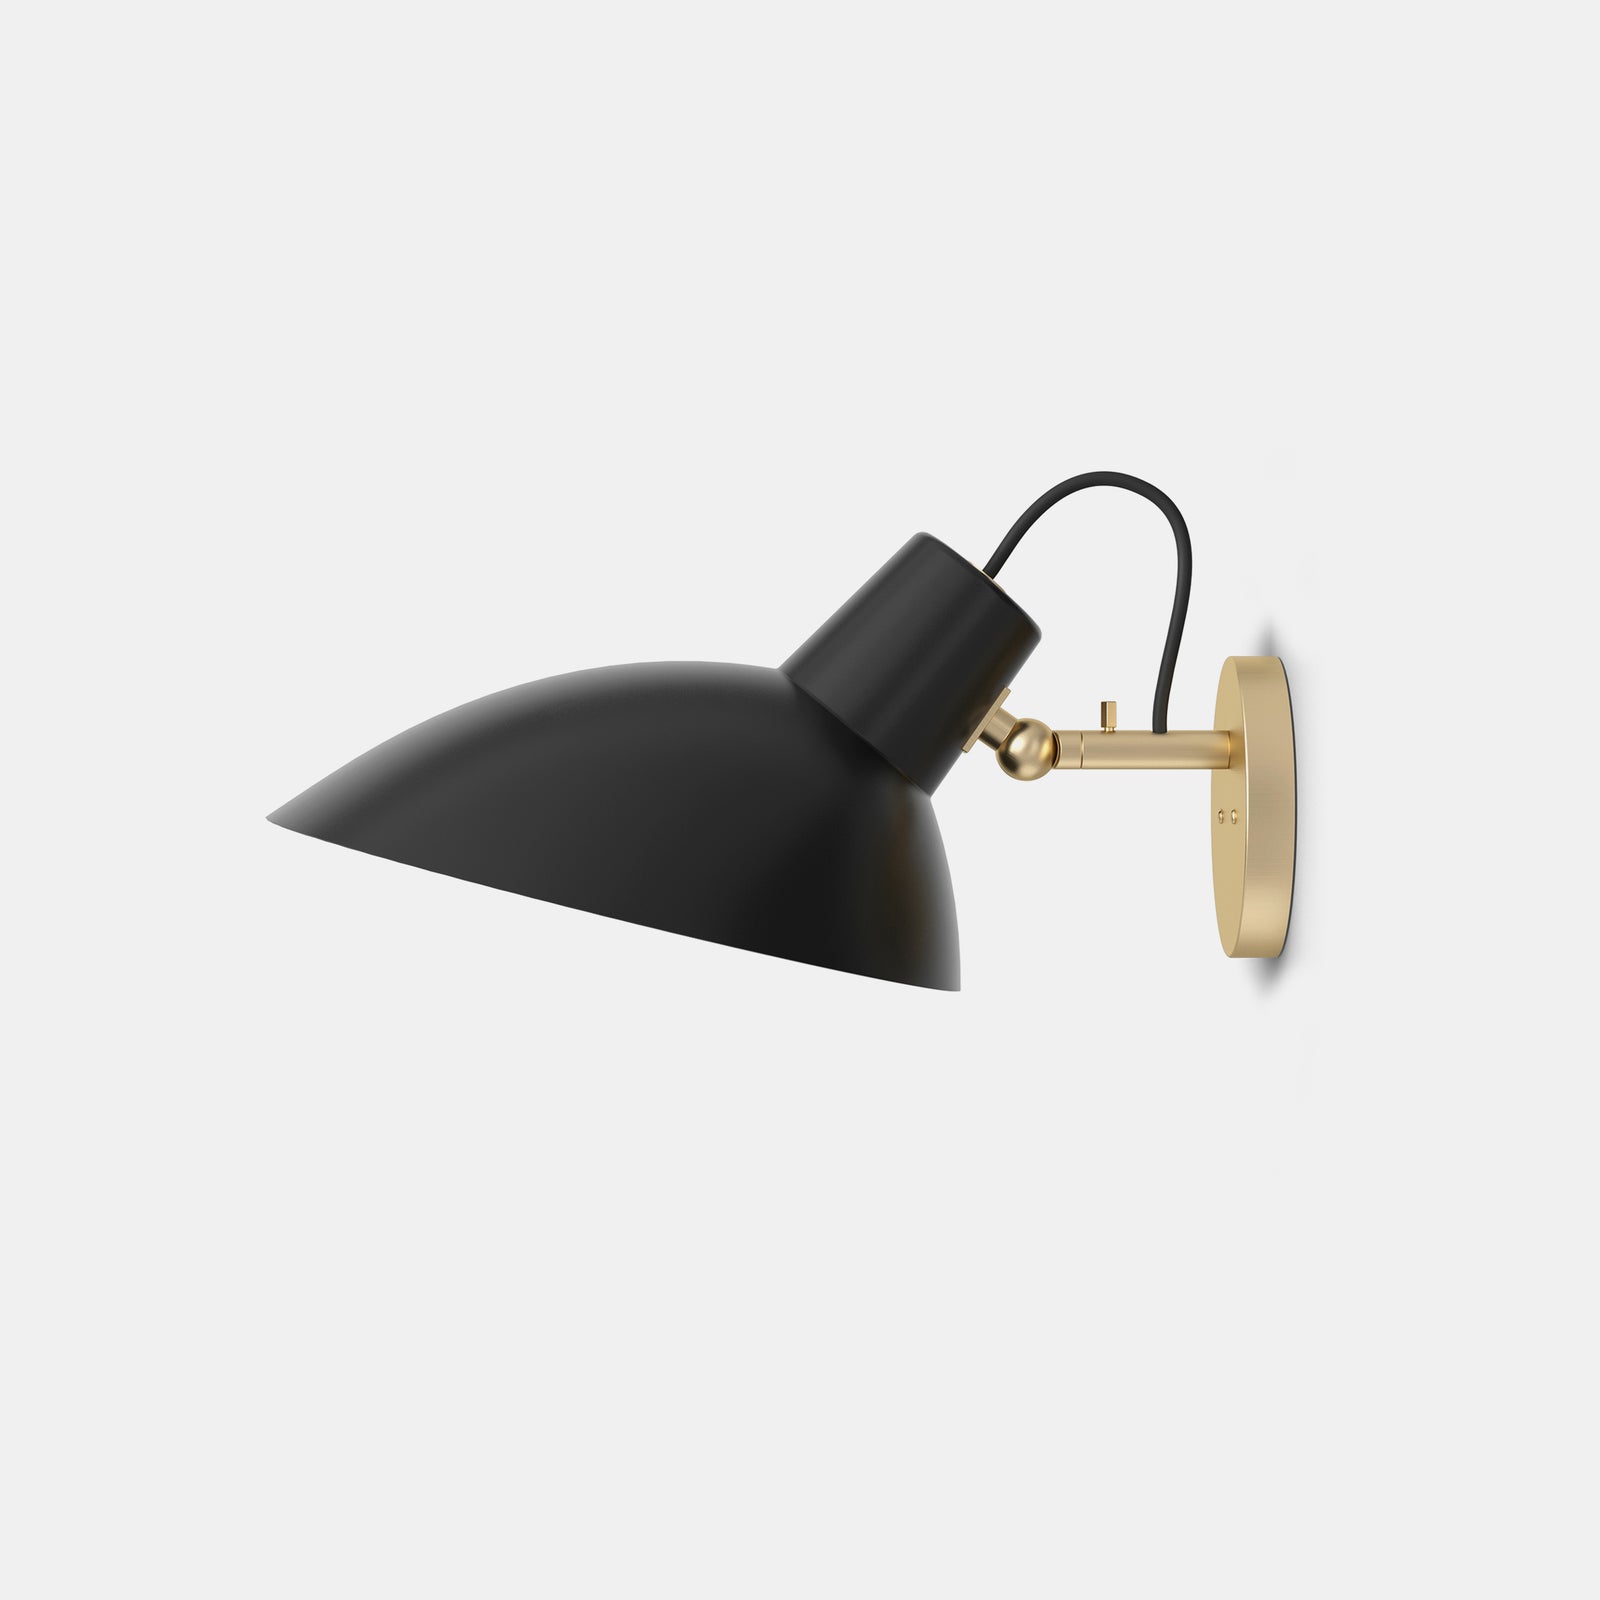 Brass Mount, Black Reflector with Switch